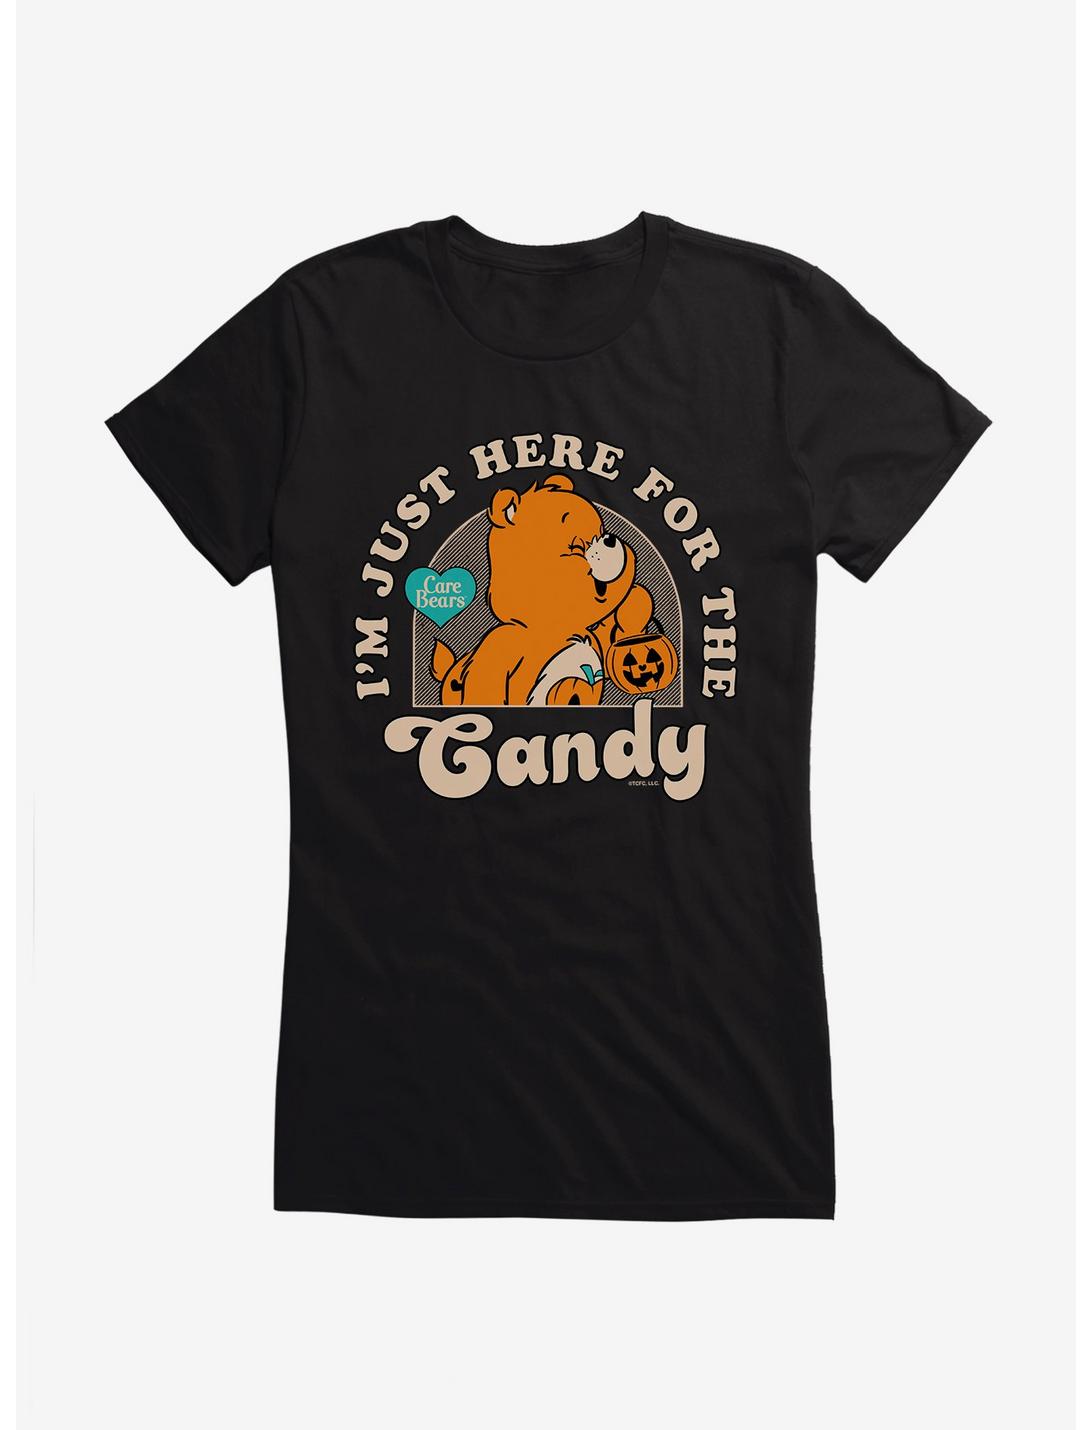 Care Bears Just Here For The Candy Girls T-Shirt, BLACK, hi-res